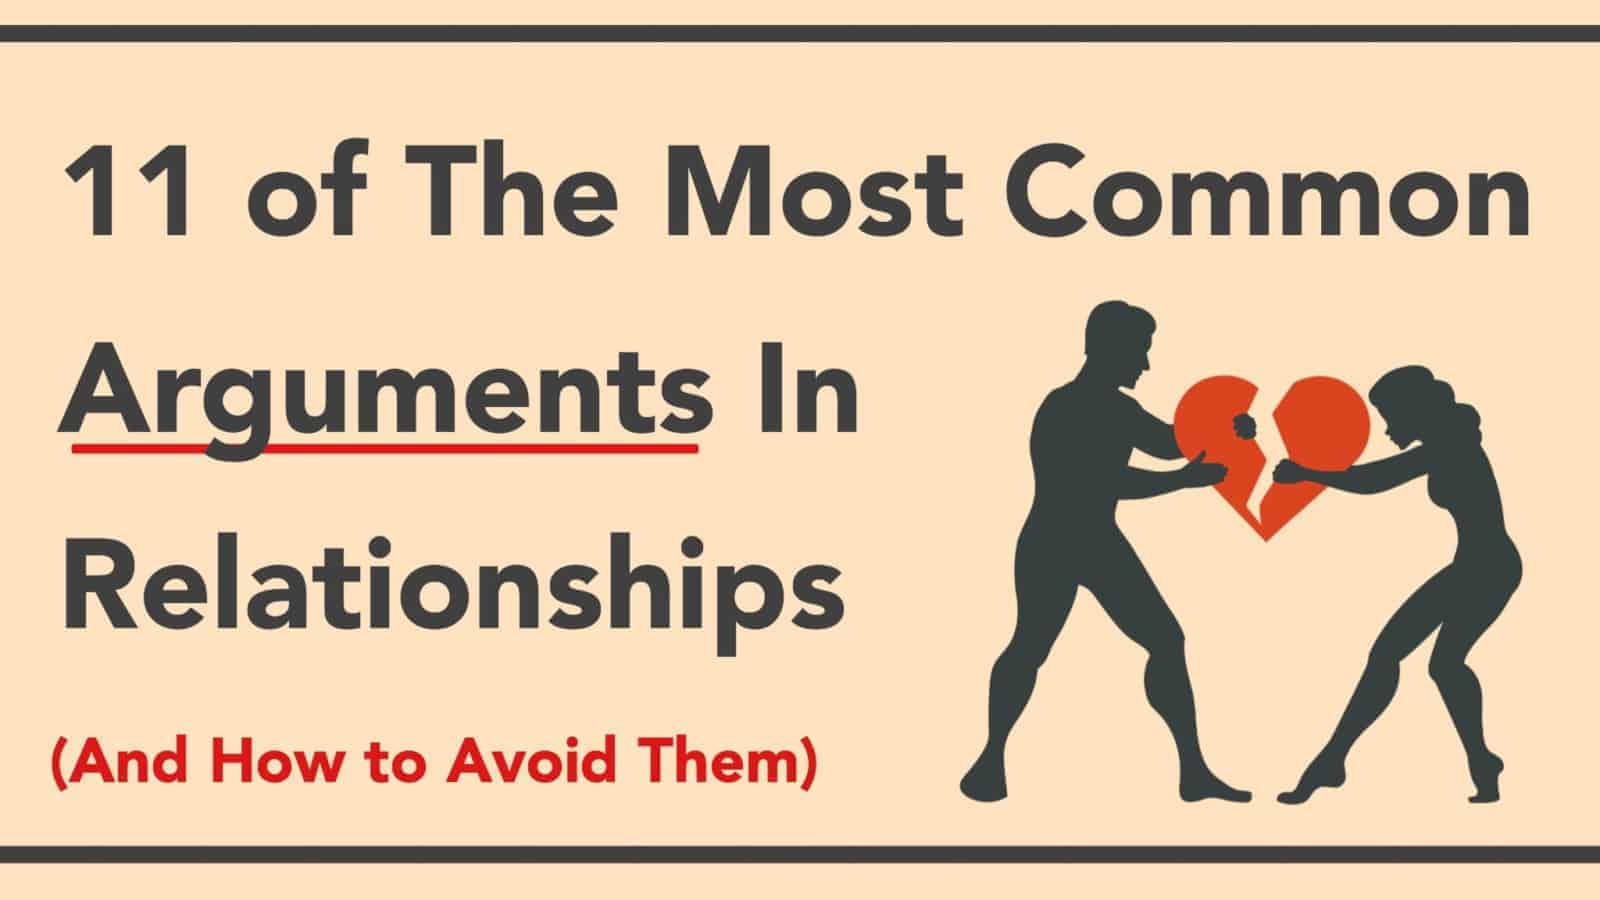 11 Common Arguments of Every Relationship (And How to Avoid Having Them)